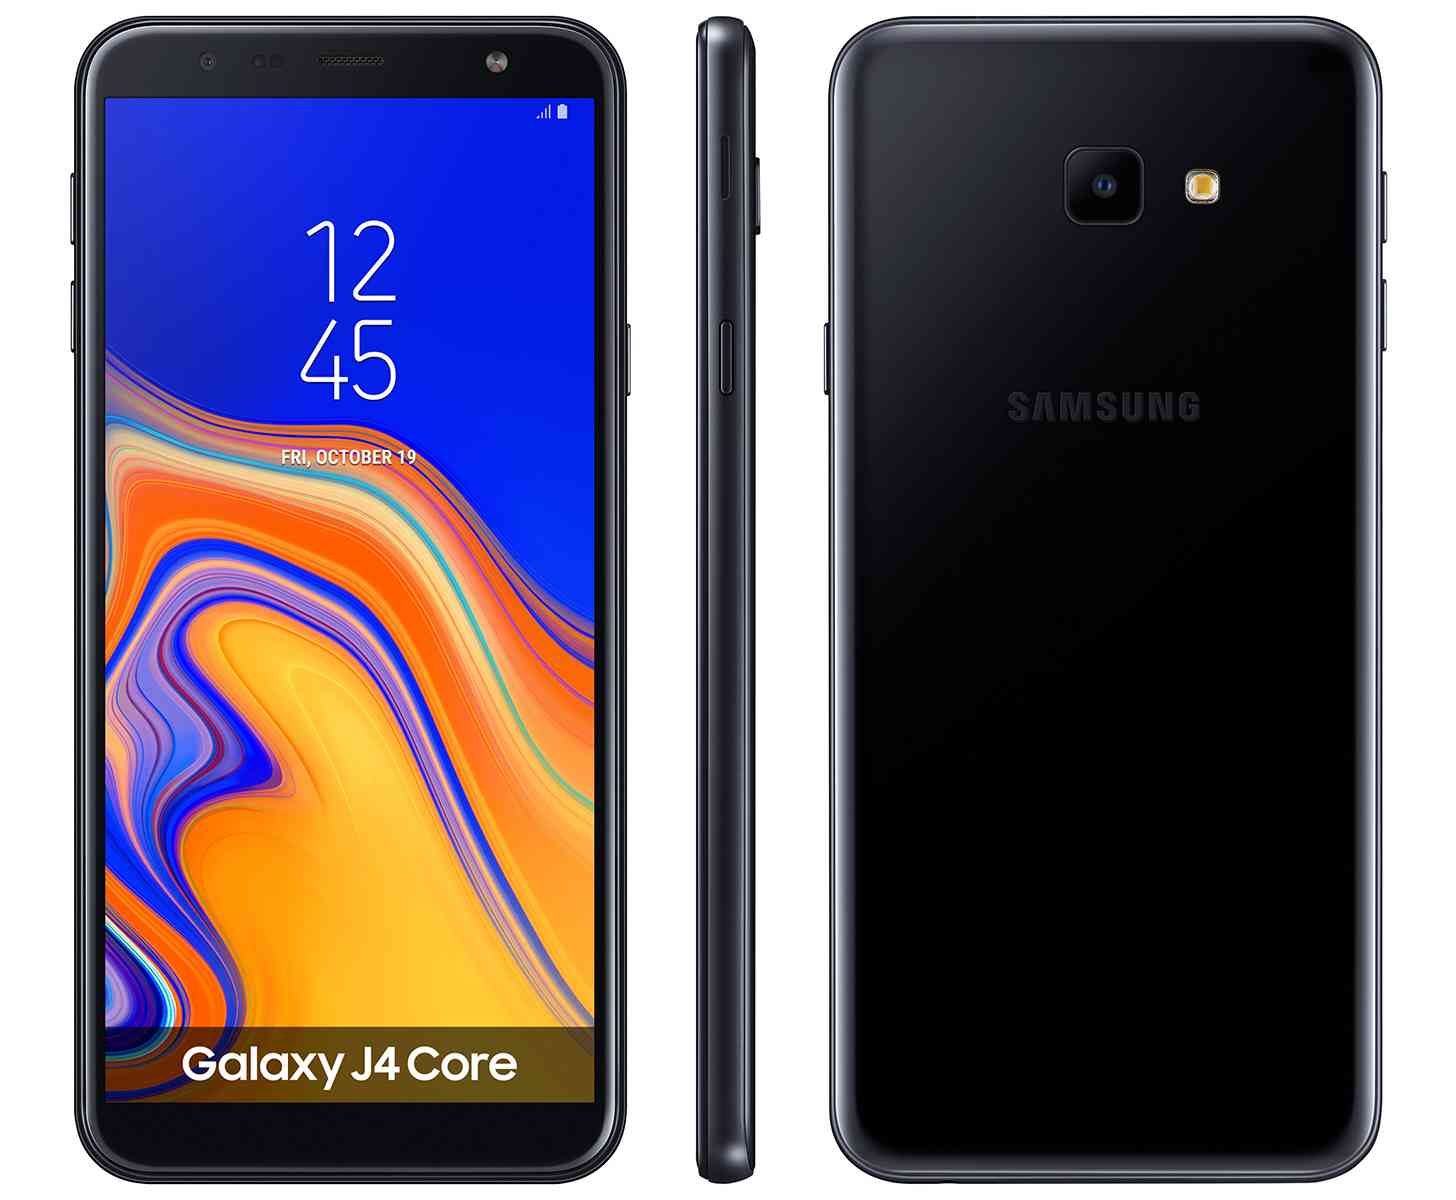 Samsung Galaxy J4 Core official Android Go